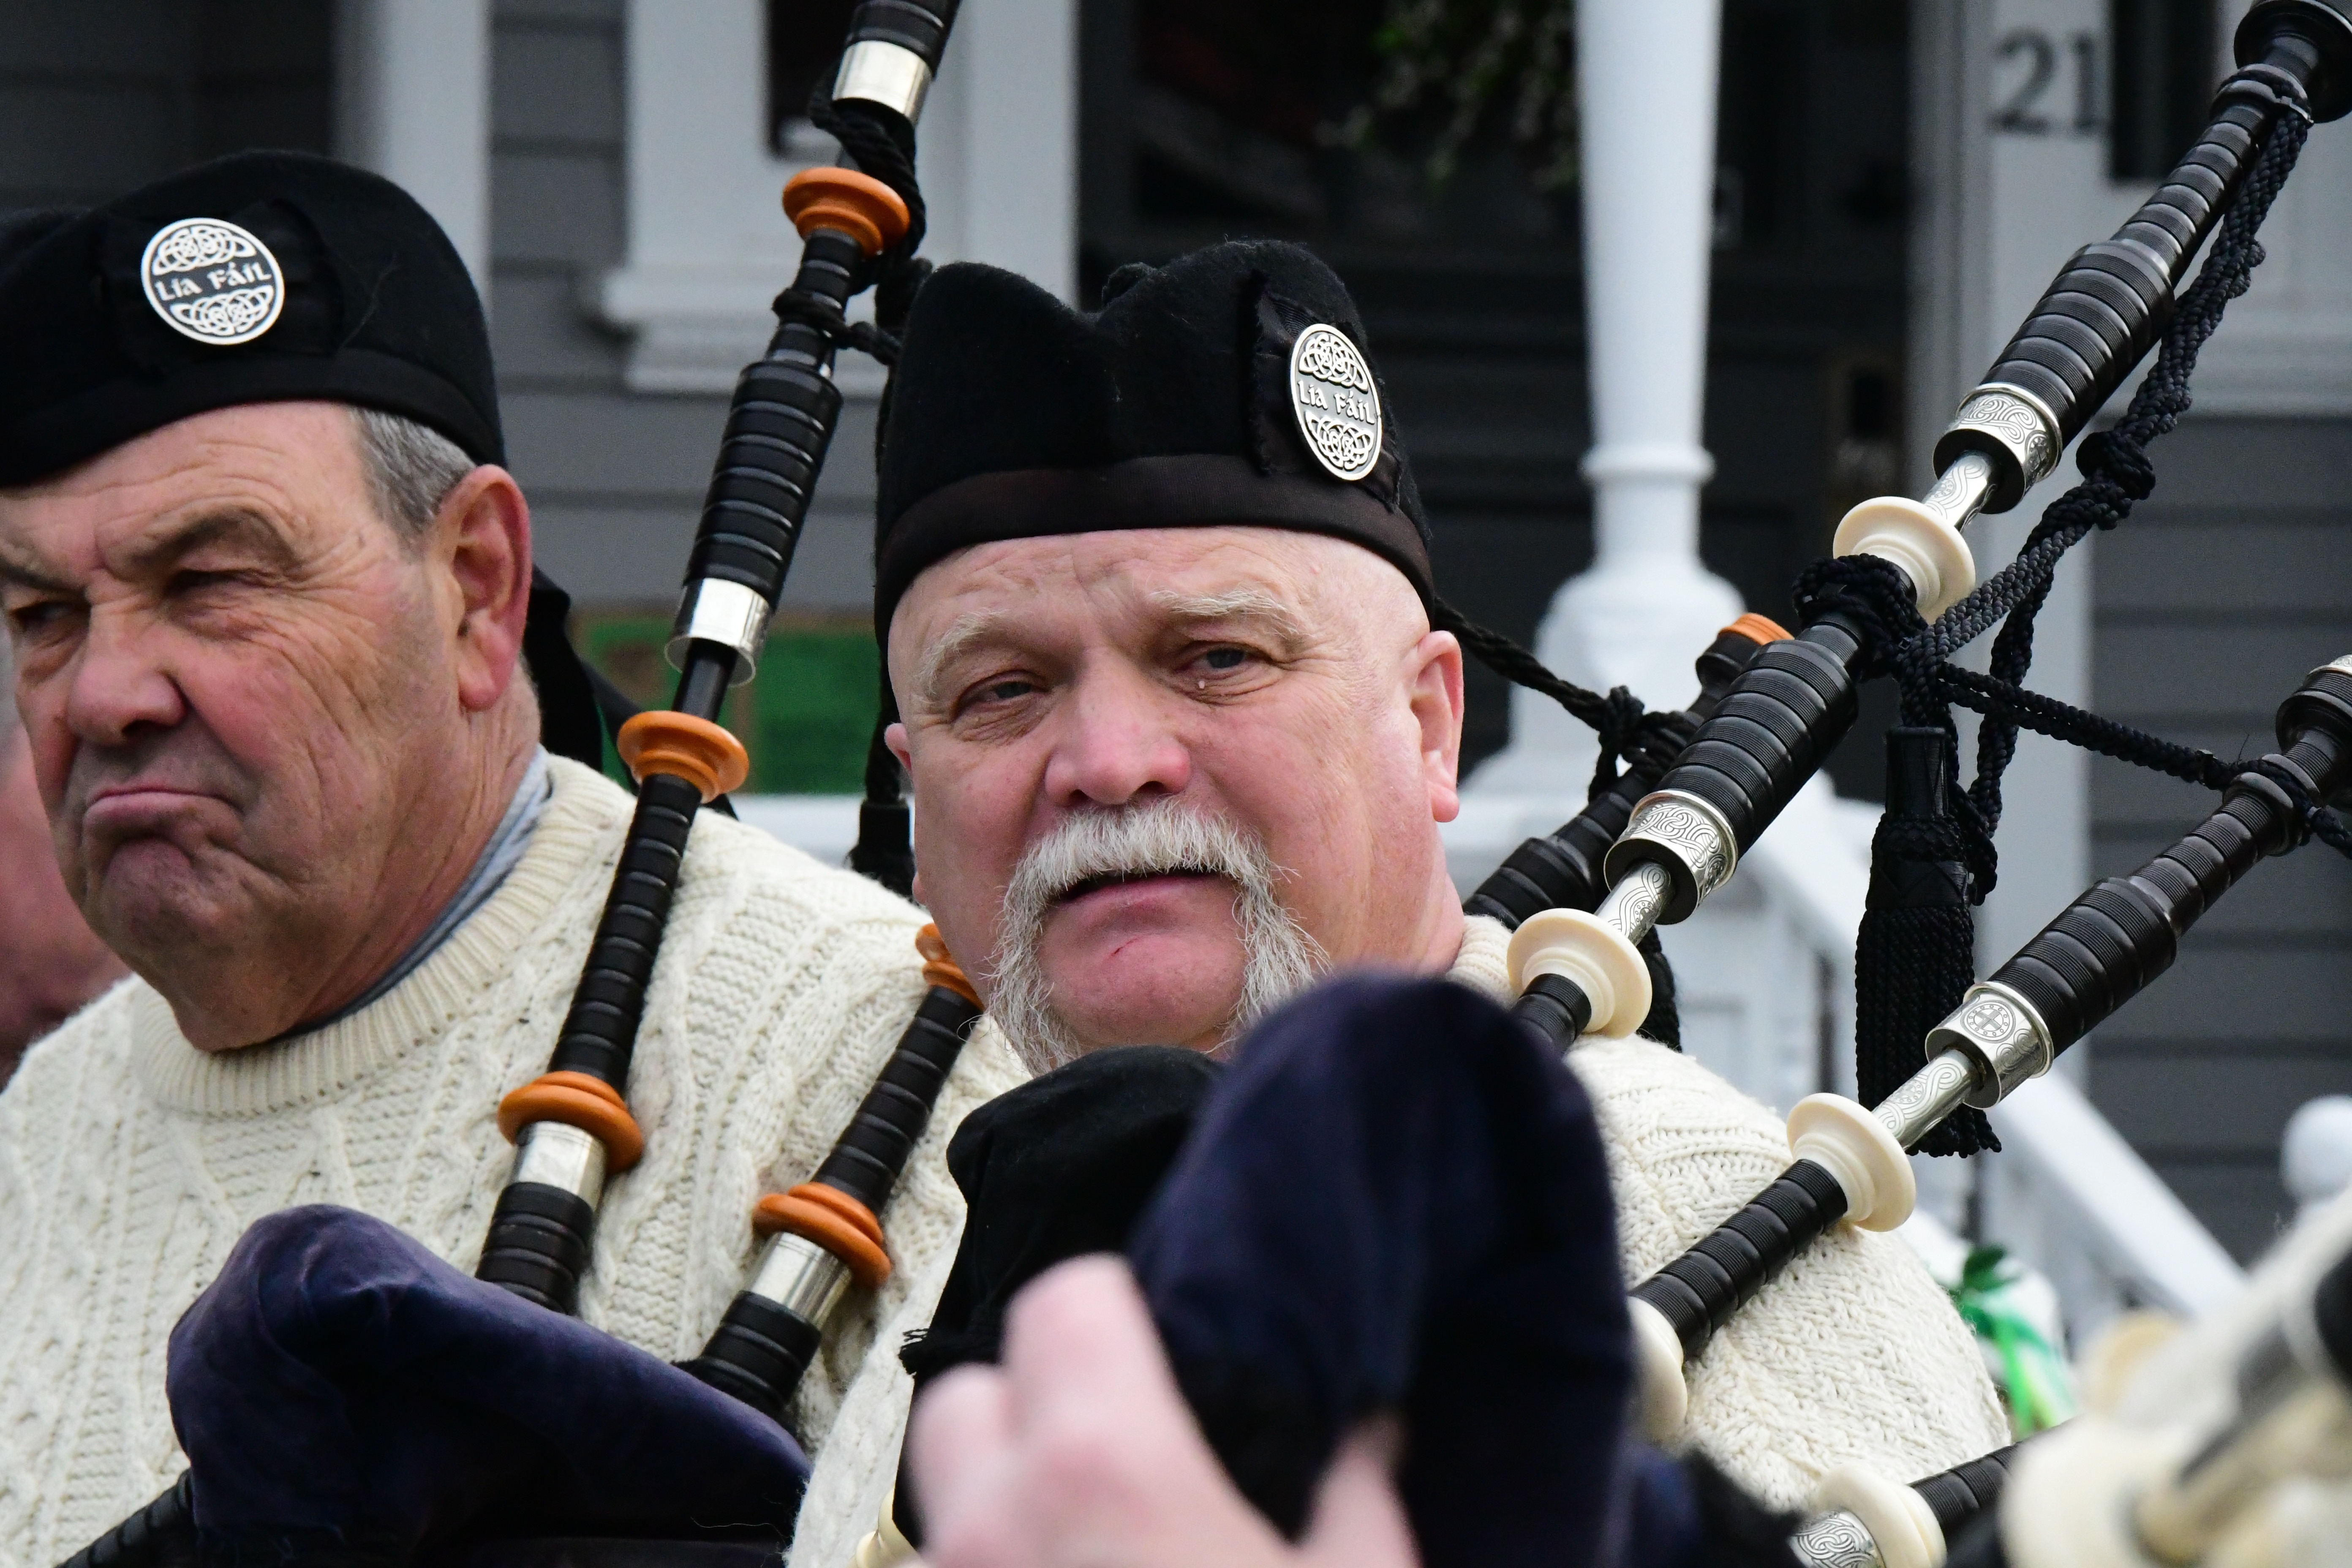 The 2022 St Patrick's Day Parade hosted by the Friendly Sons of St Patrick Hunterdon County took place in Clinton on March 13 , 2022



